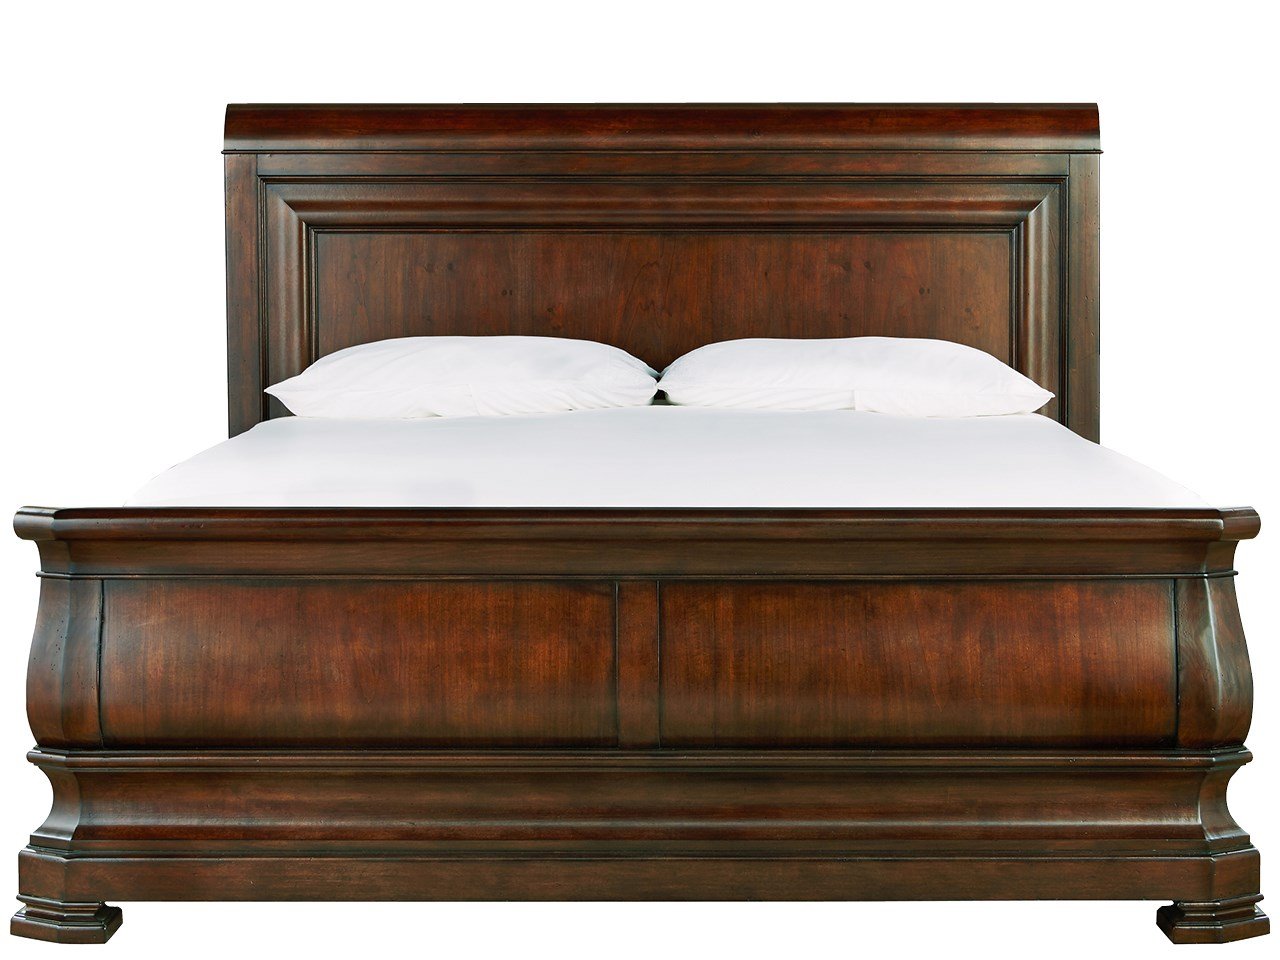 Reprise King Sleigh Bed Universal, Modern Sleigh Beds King Size